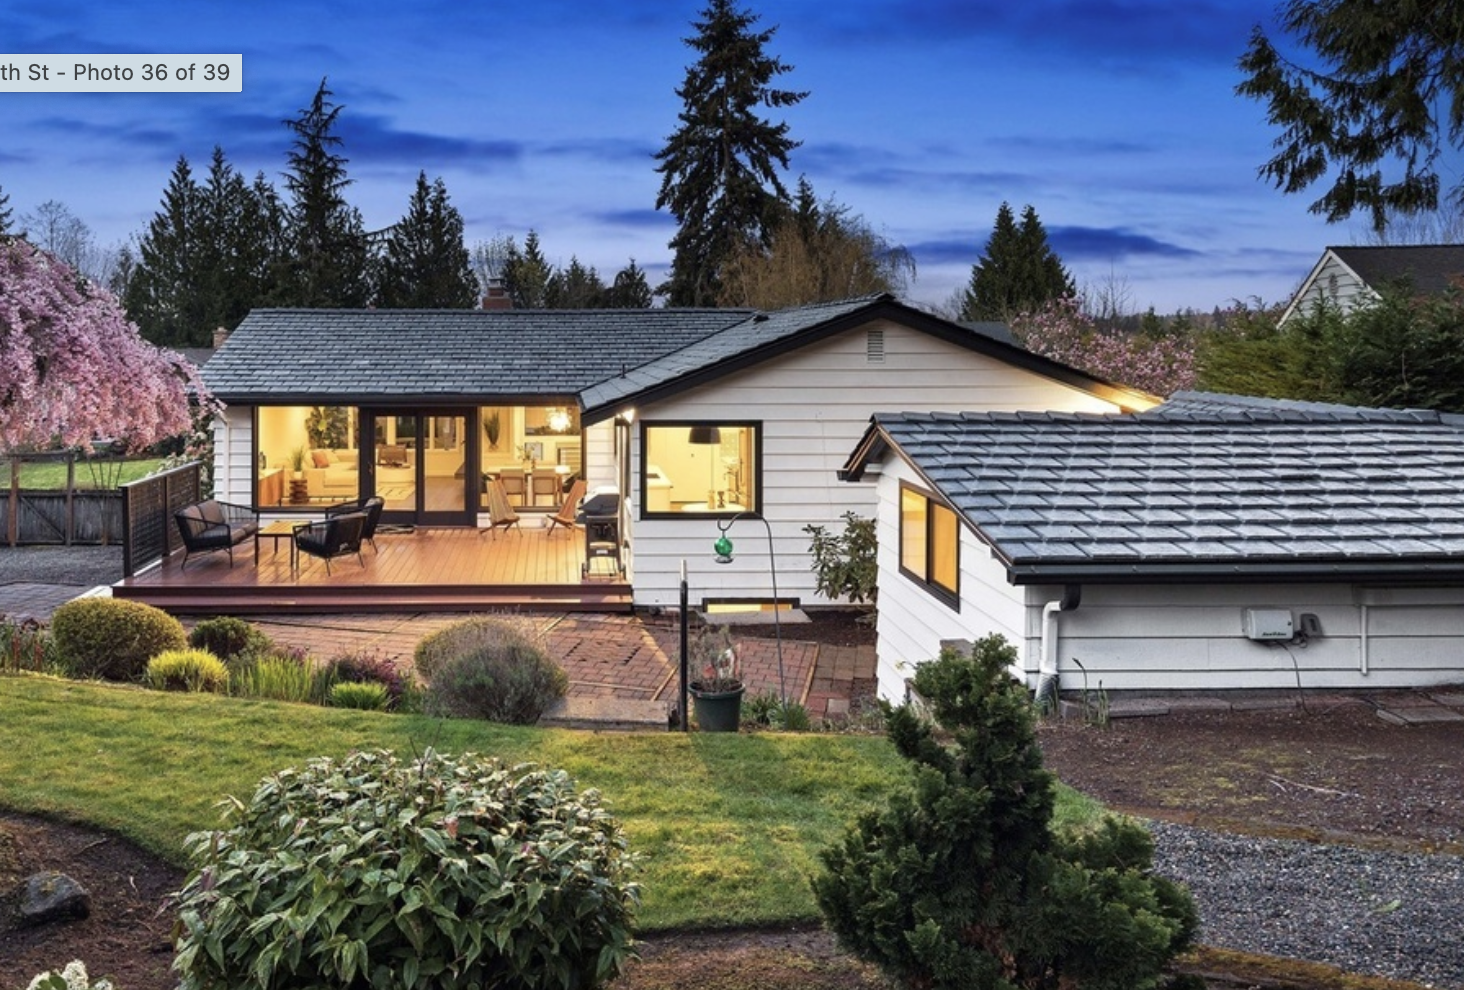 Bellevue, WA Residential Roofing Experts Install Composite Shingle Roofs